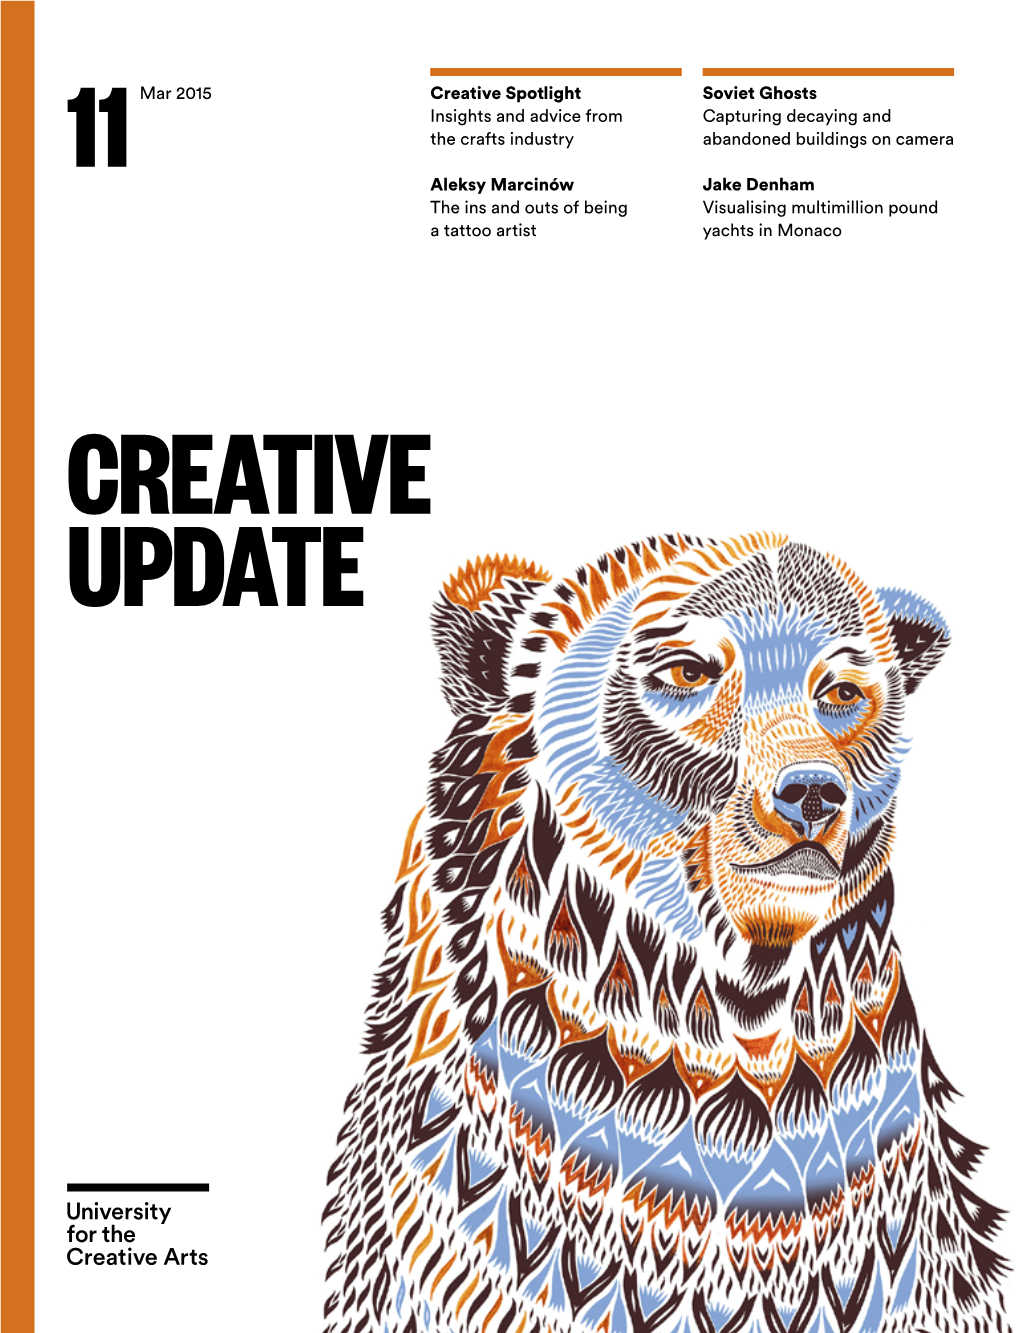 Mar 2015 Creative Spotlight Insights and Advice from the Crafts Industry